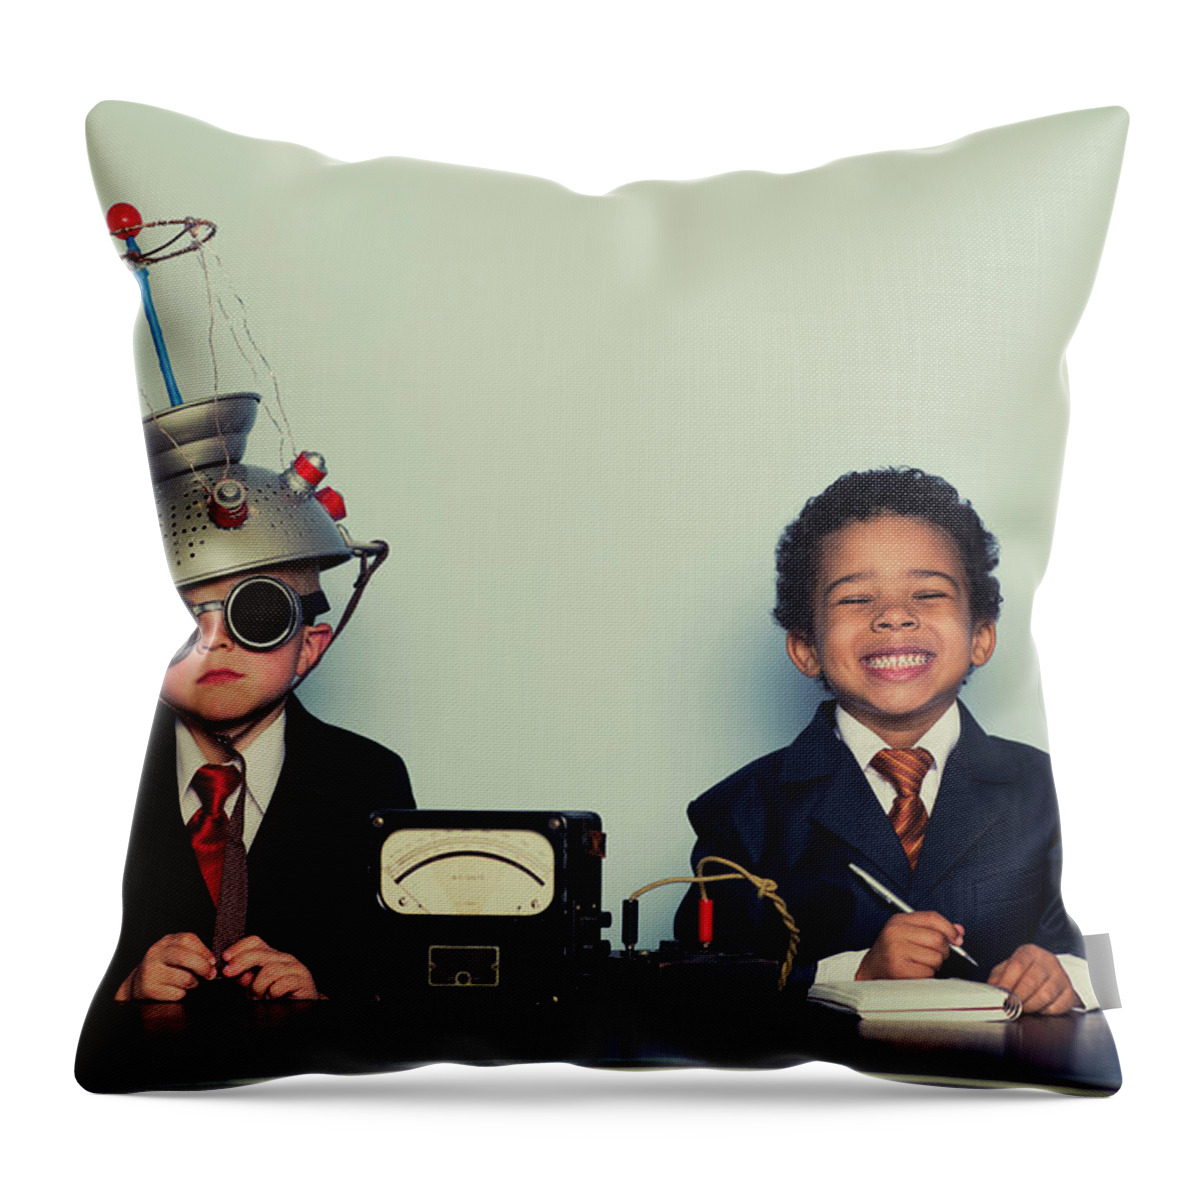 4-5 Years Throw Pillow featuring the photograph Business Boys Conduct Interview In by Richvintage